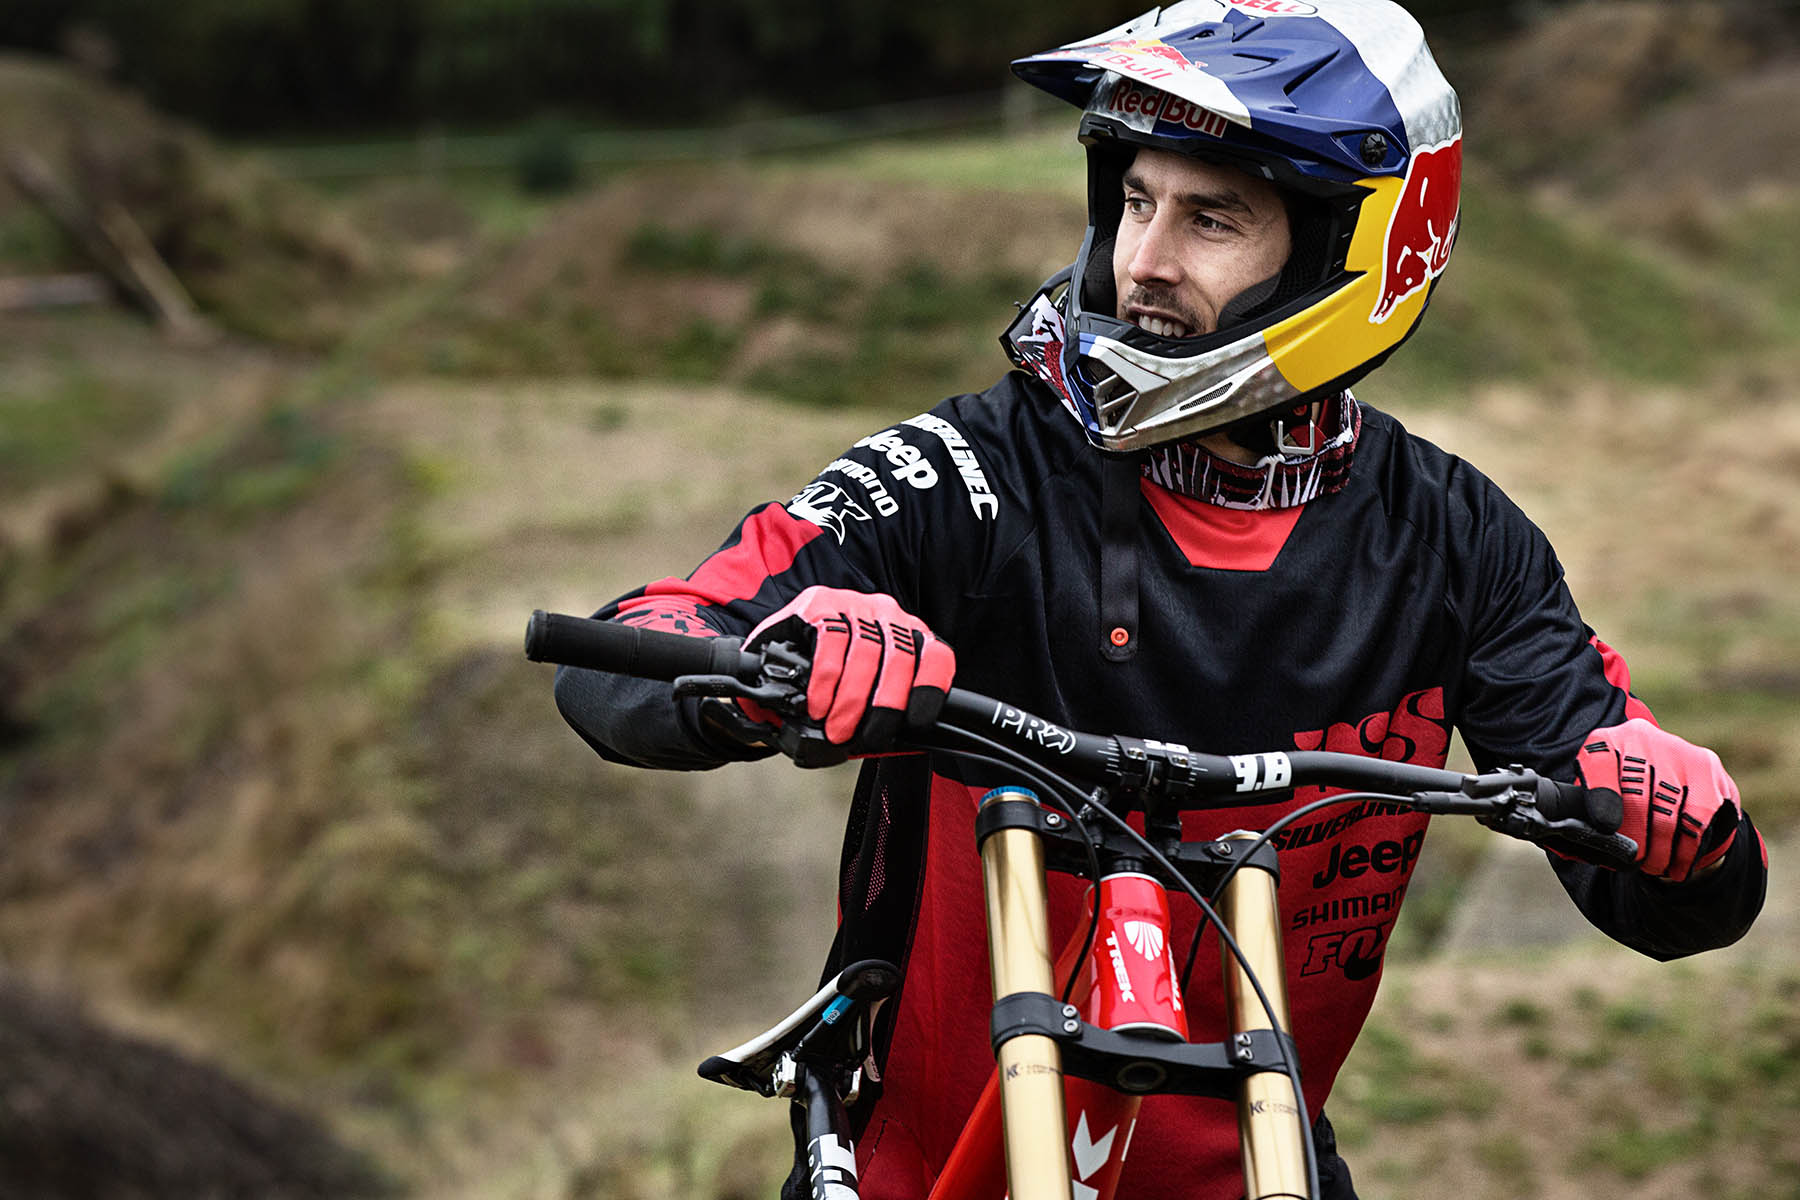 Atherton Racing in Wales, United Kingdom on the 04 November 2015